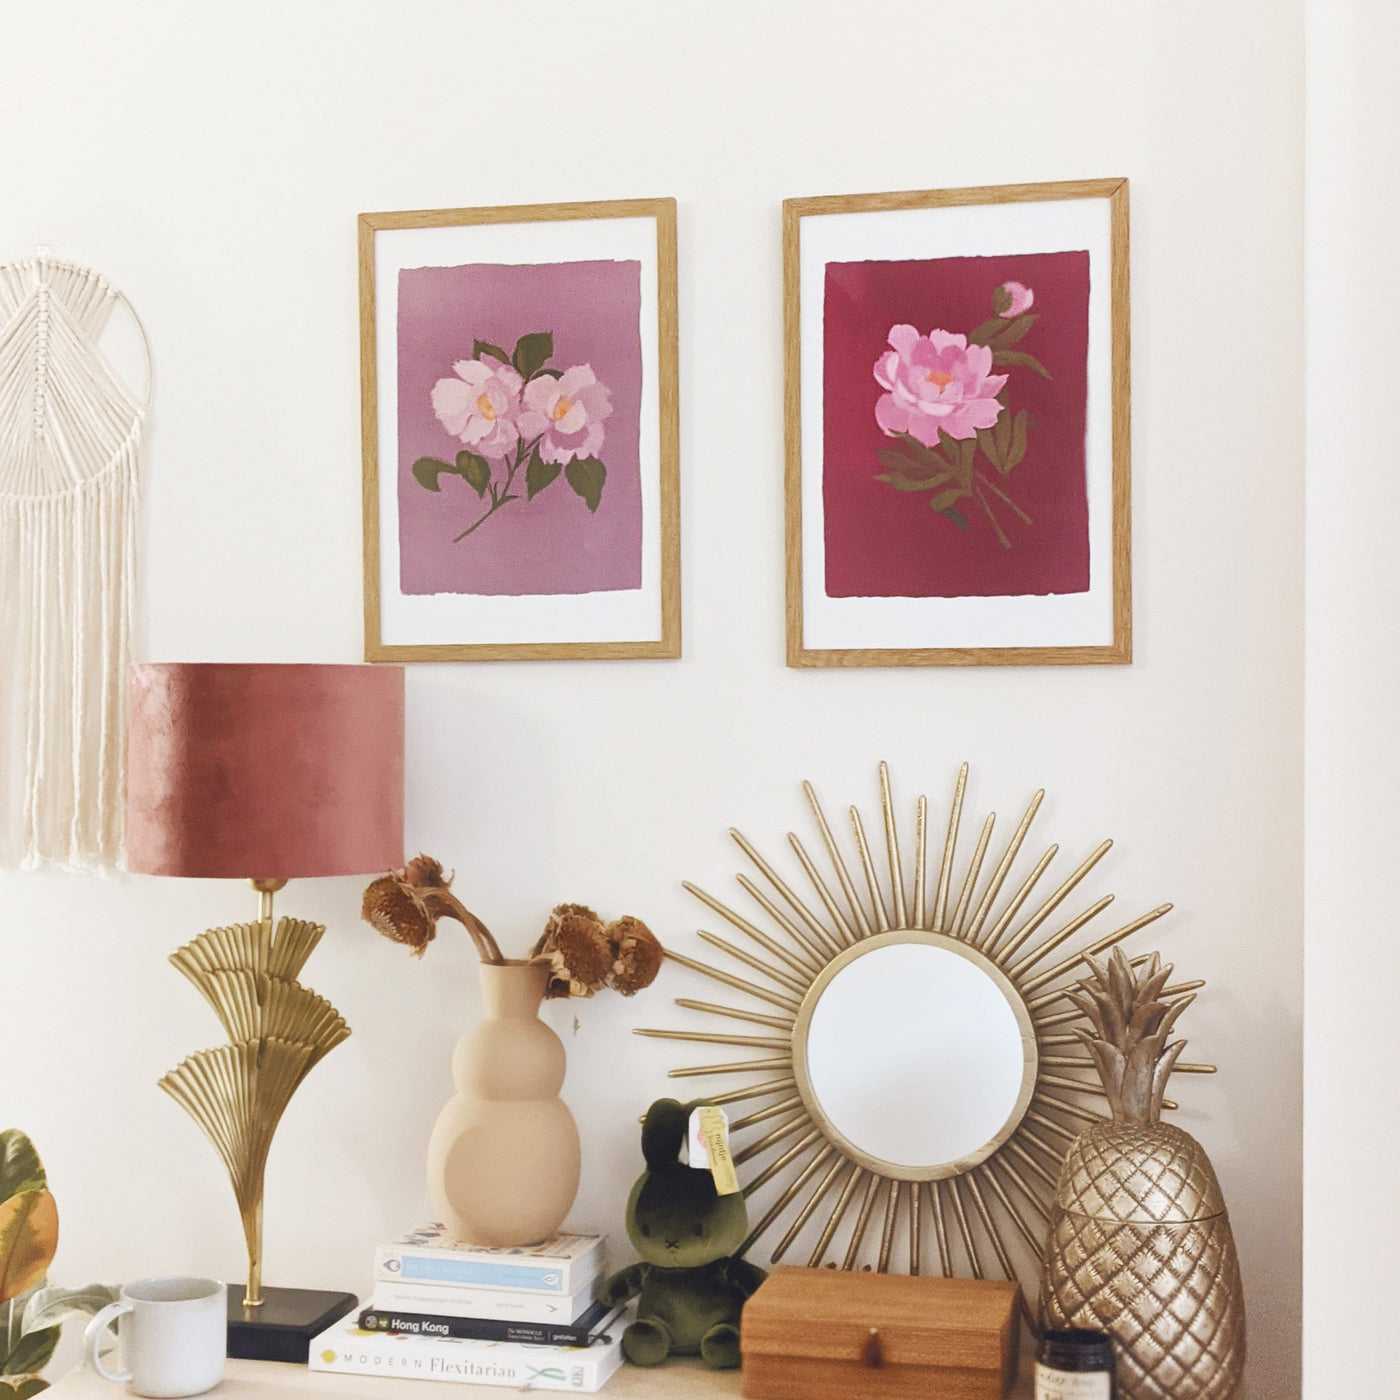 A Botanical Print Of A Pink Peony On A Burgundy Pink Background Hanging On A Wall With Another Botanical Print - Annie Dornan Smith